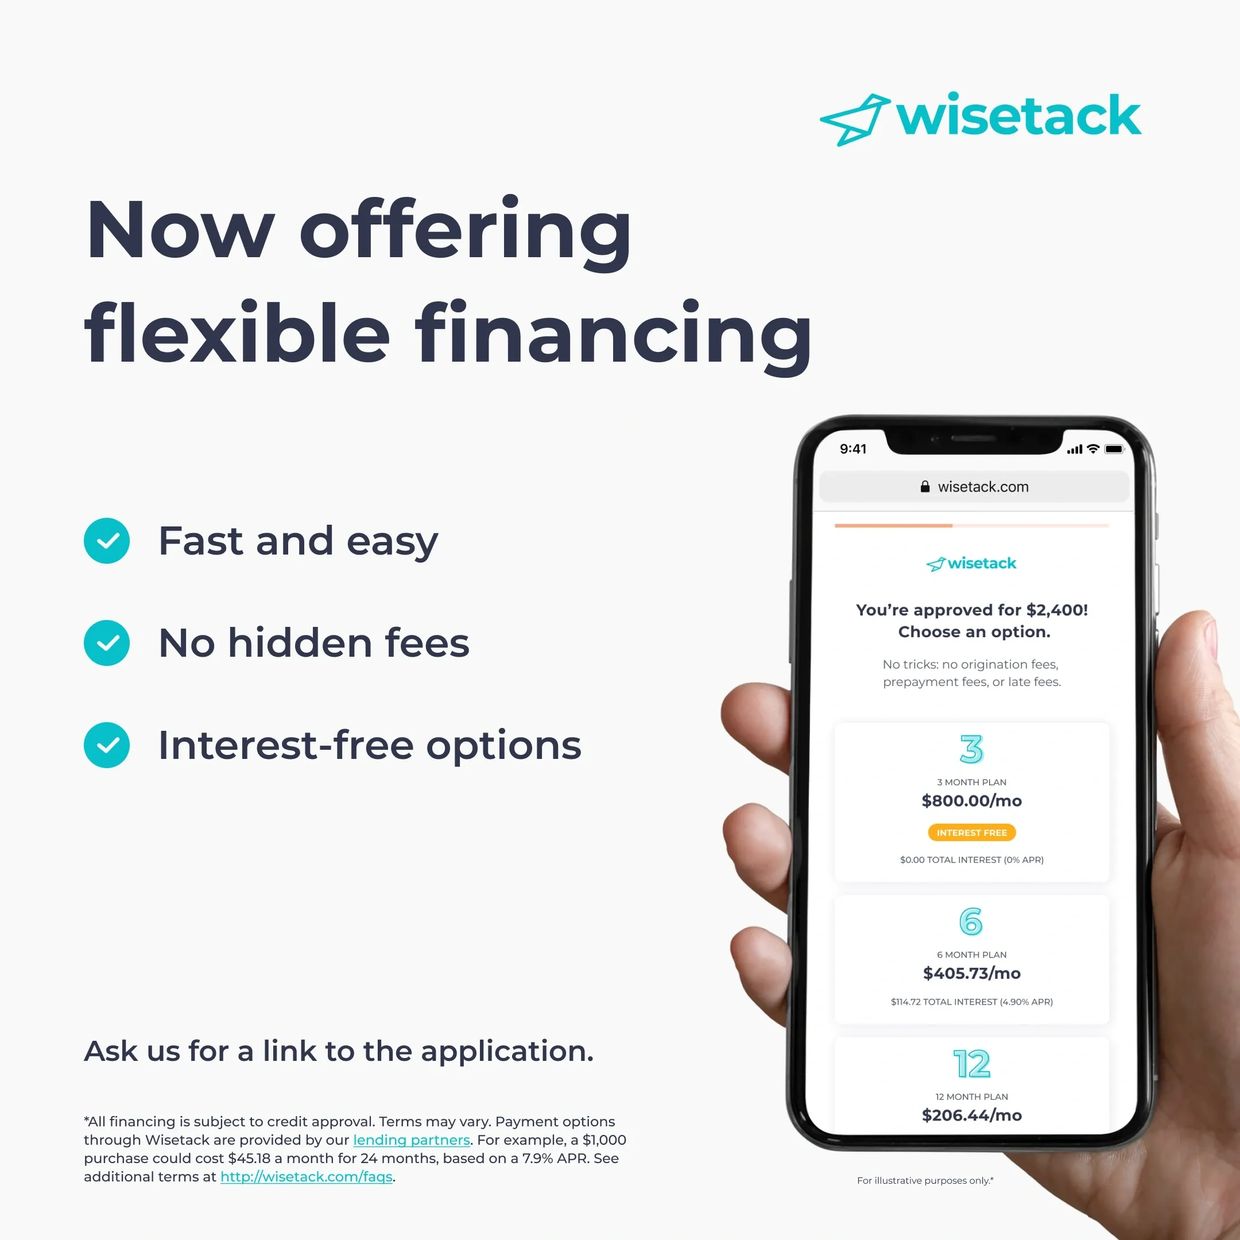 We offer financing
We’ve partnered with Wisetack to offer our customers flexible financing options, 